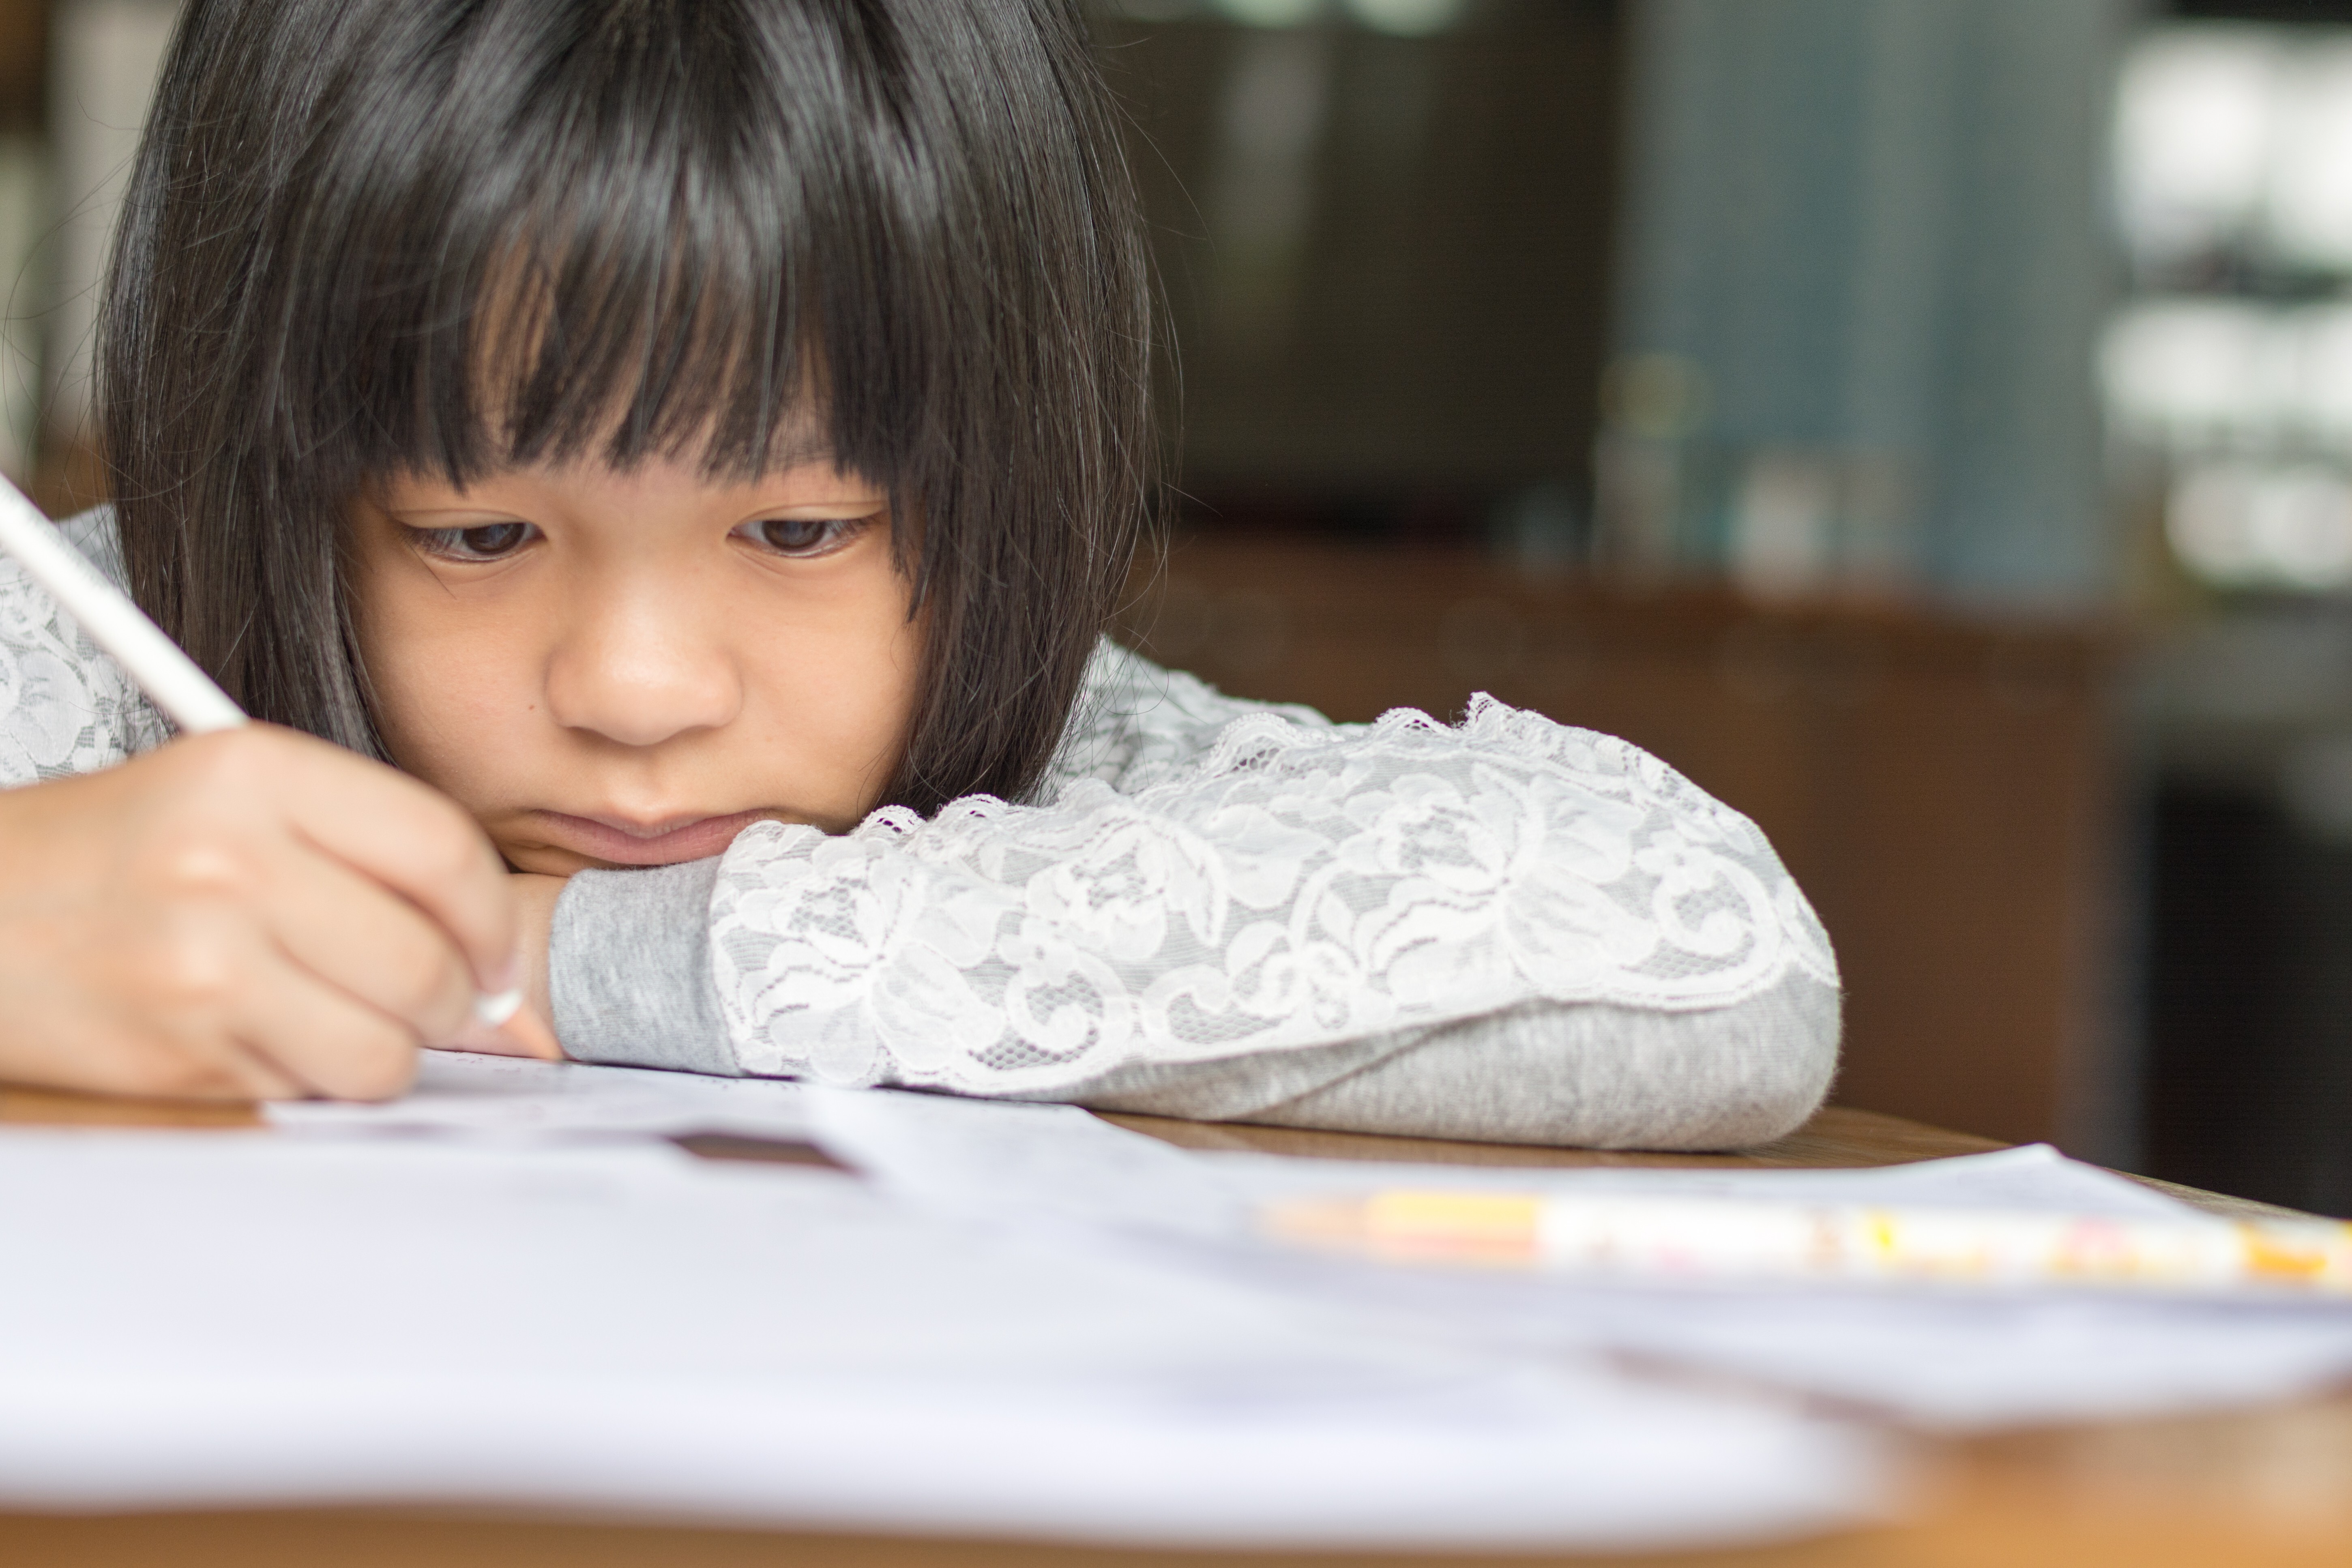 Beijing has introduced a series of measures designed to reduce the pressures on children. Photo: Shutterstock